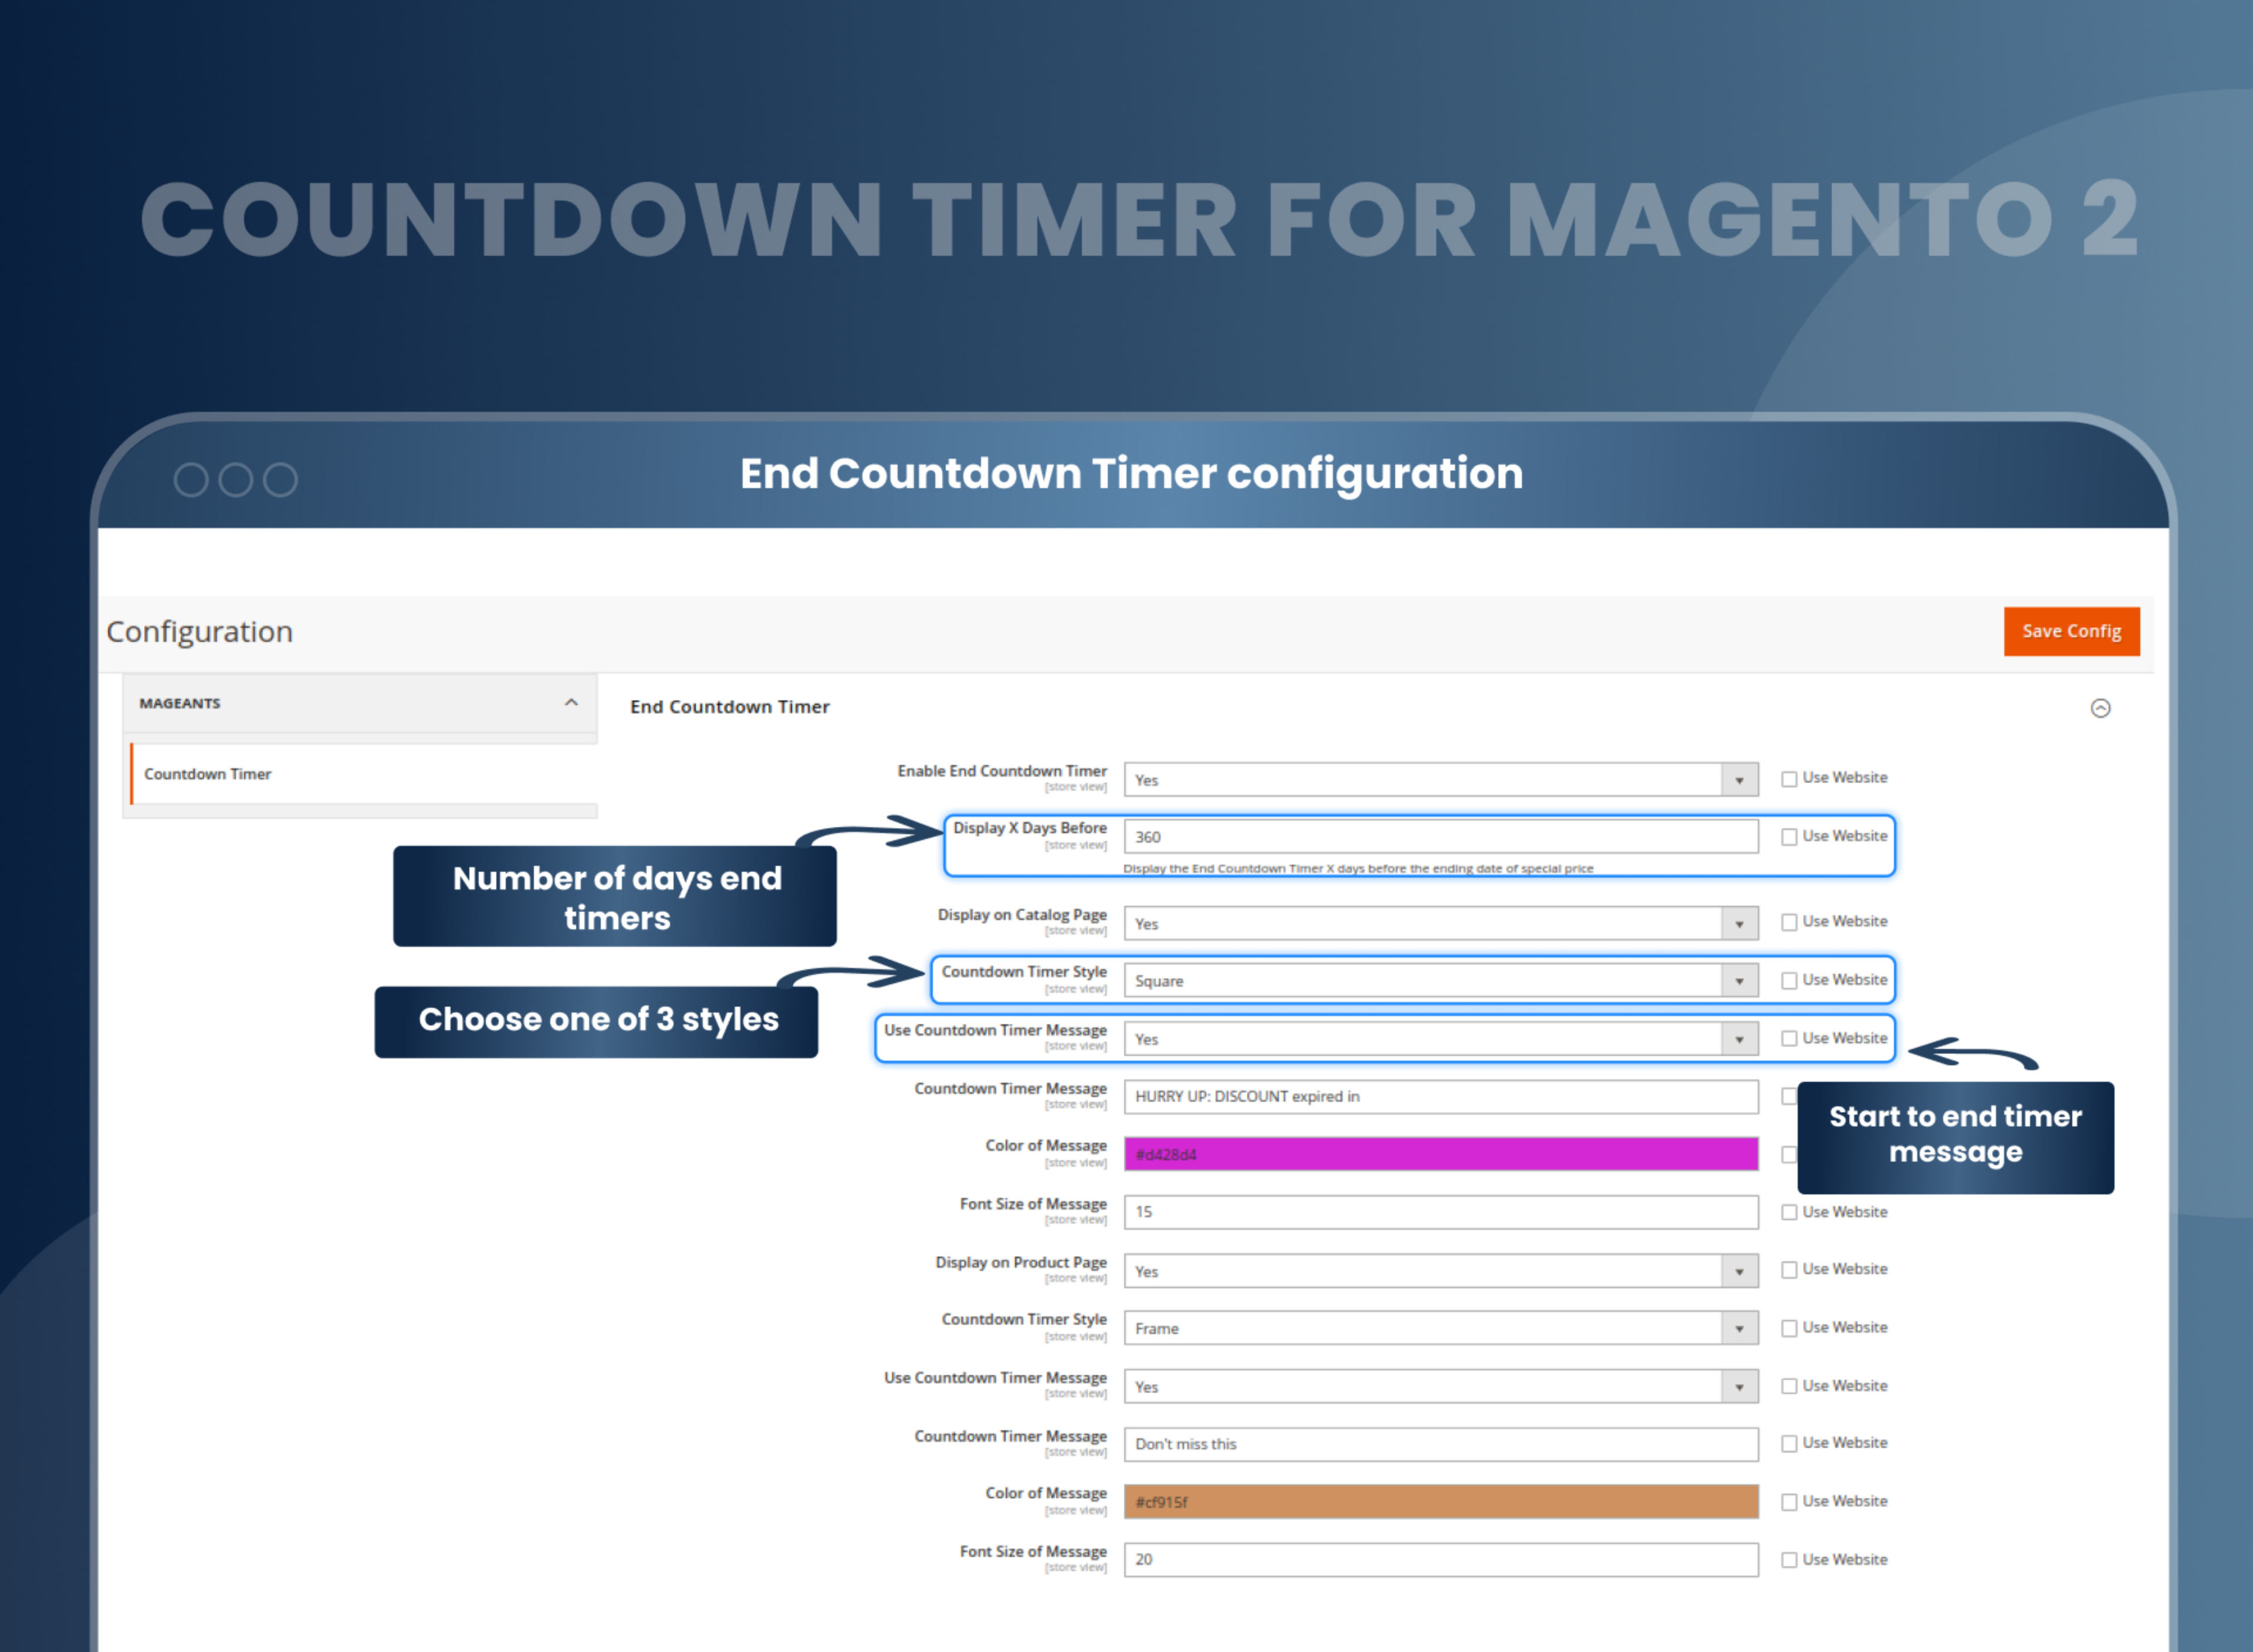 End Countdown Timer configuration